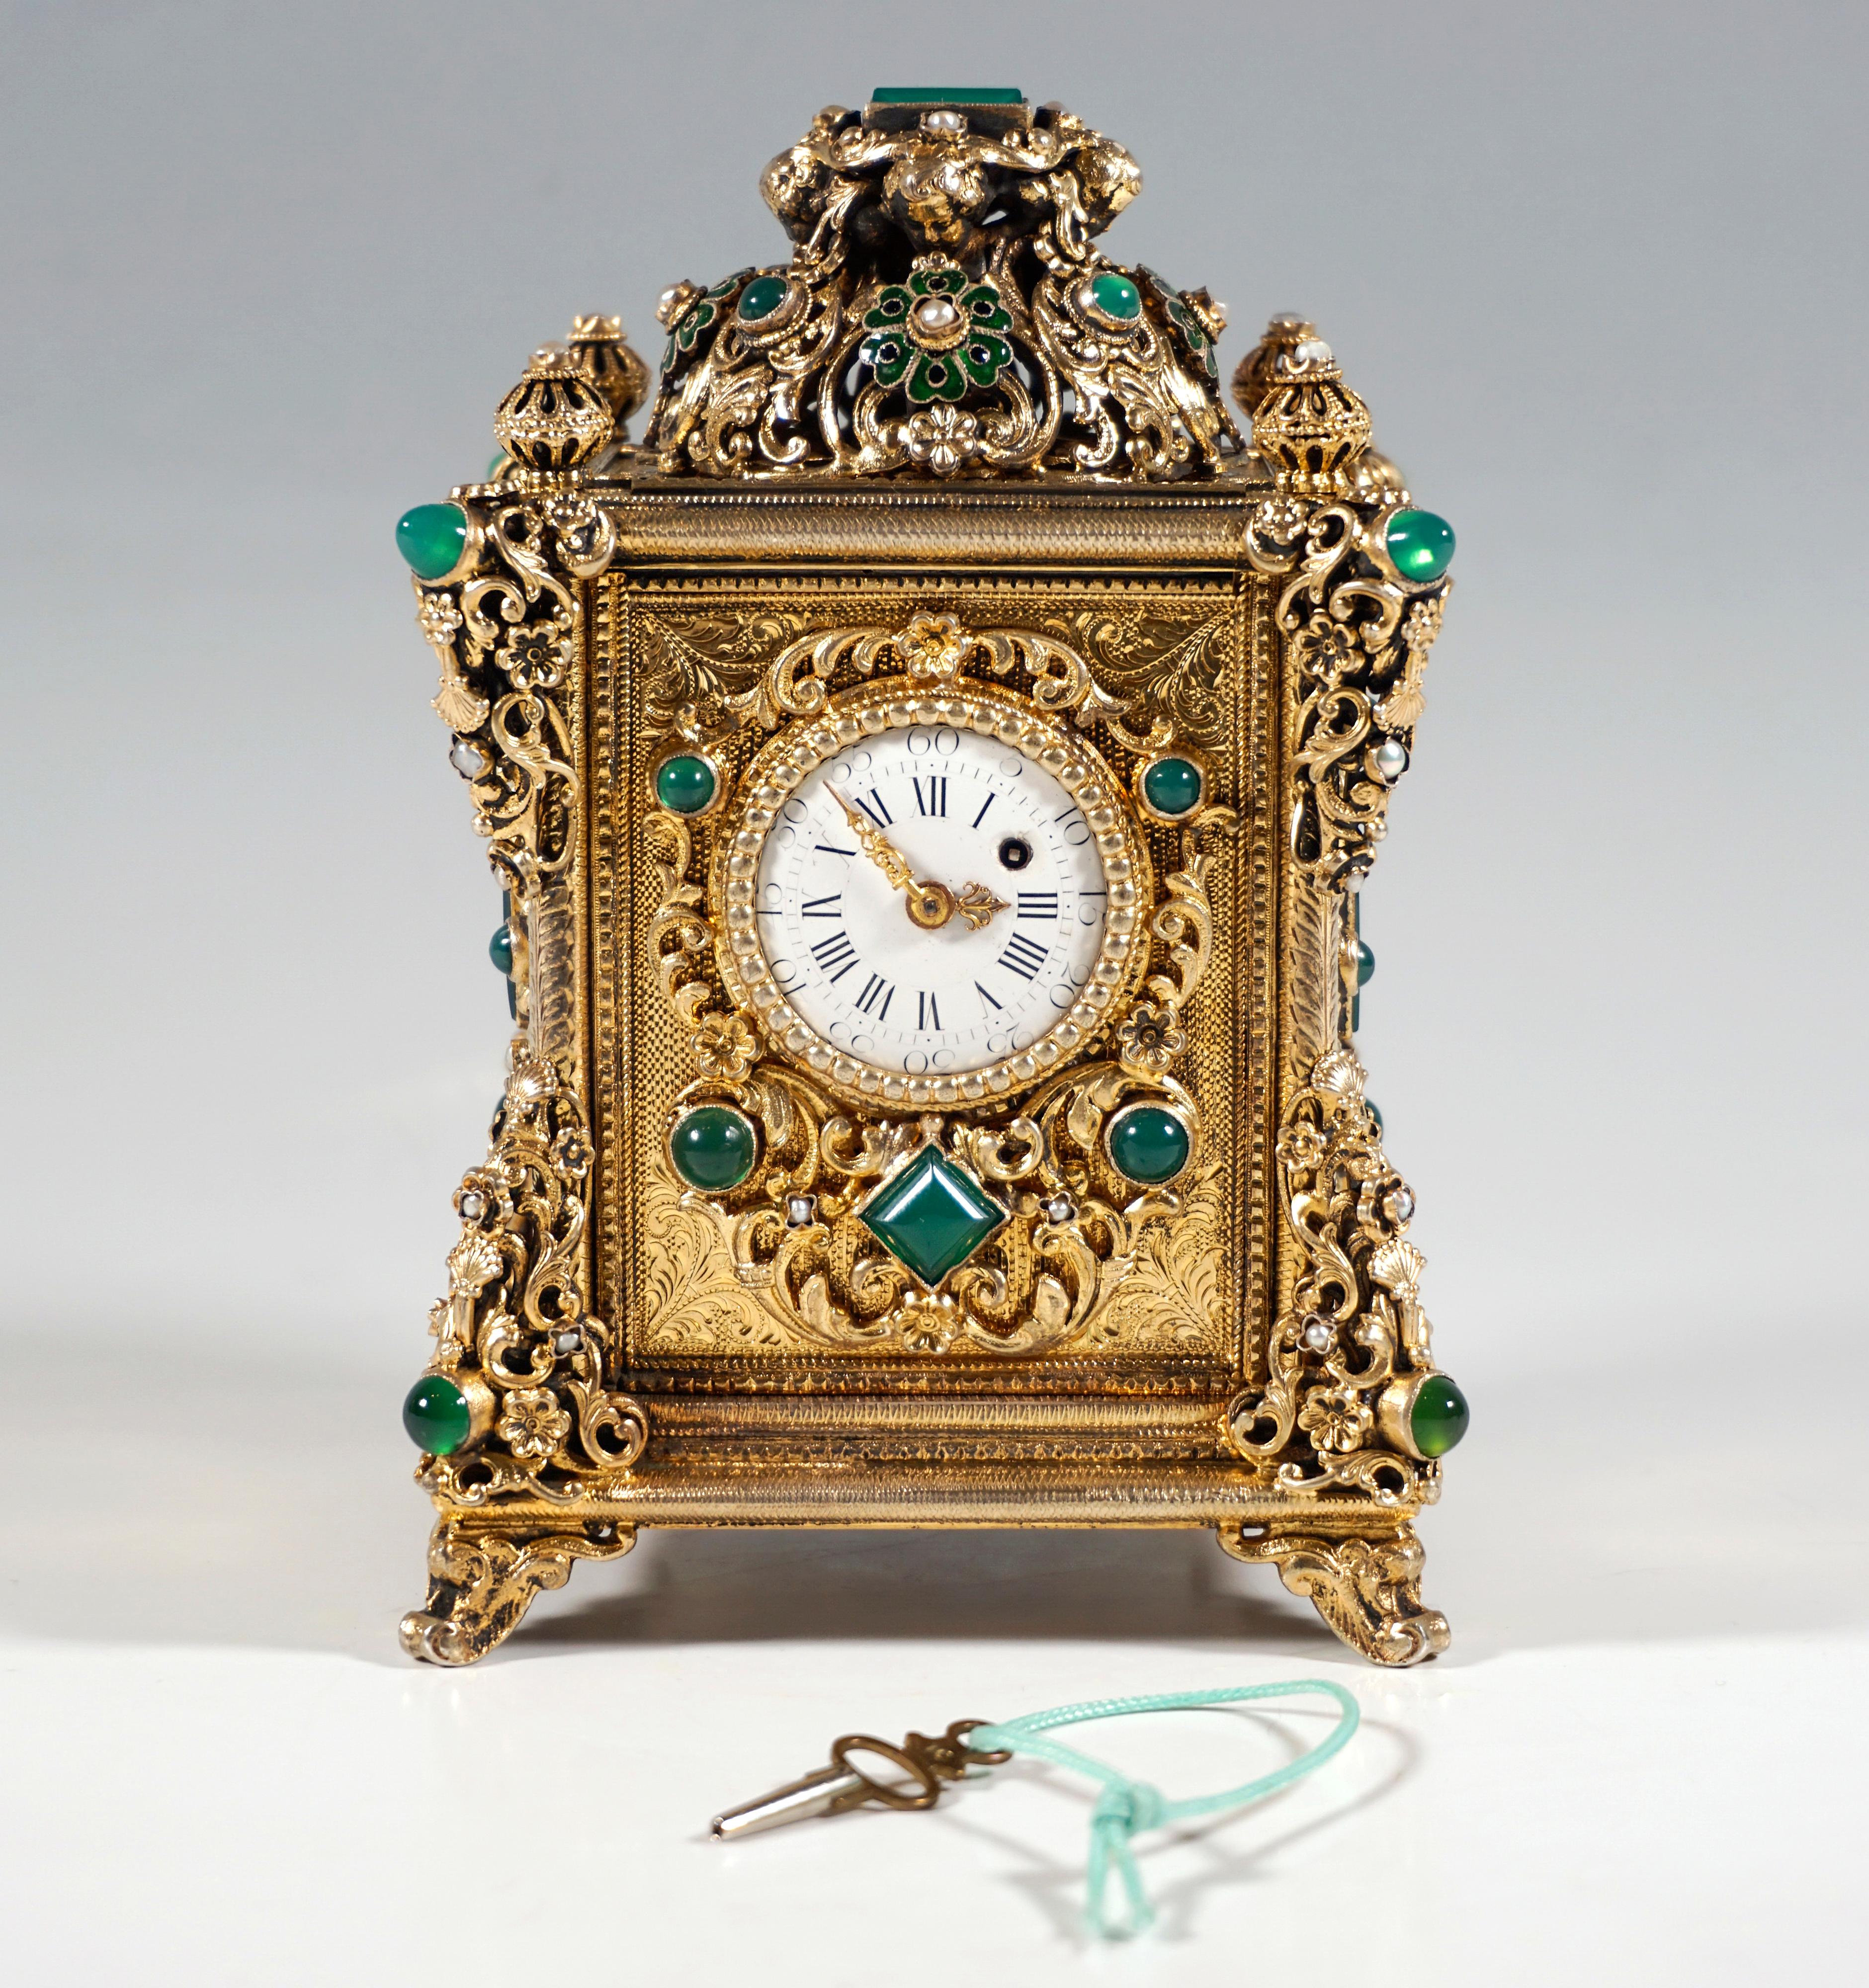 Elaborately decorated table clock in excellent condition:
Clock case in cubic basic form on four rocaille feet, all components made of silver with elaborate chasing and surface gilding, rich decoration of all surfaces, as well as corners and edges